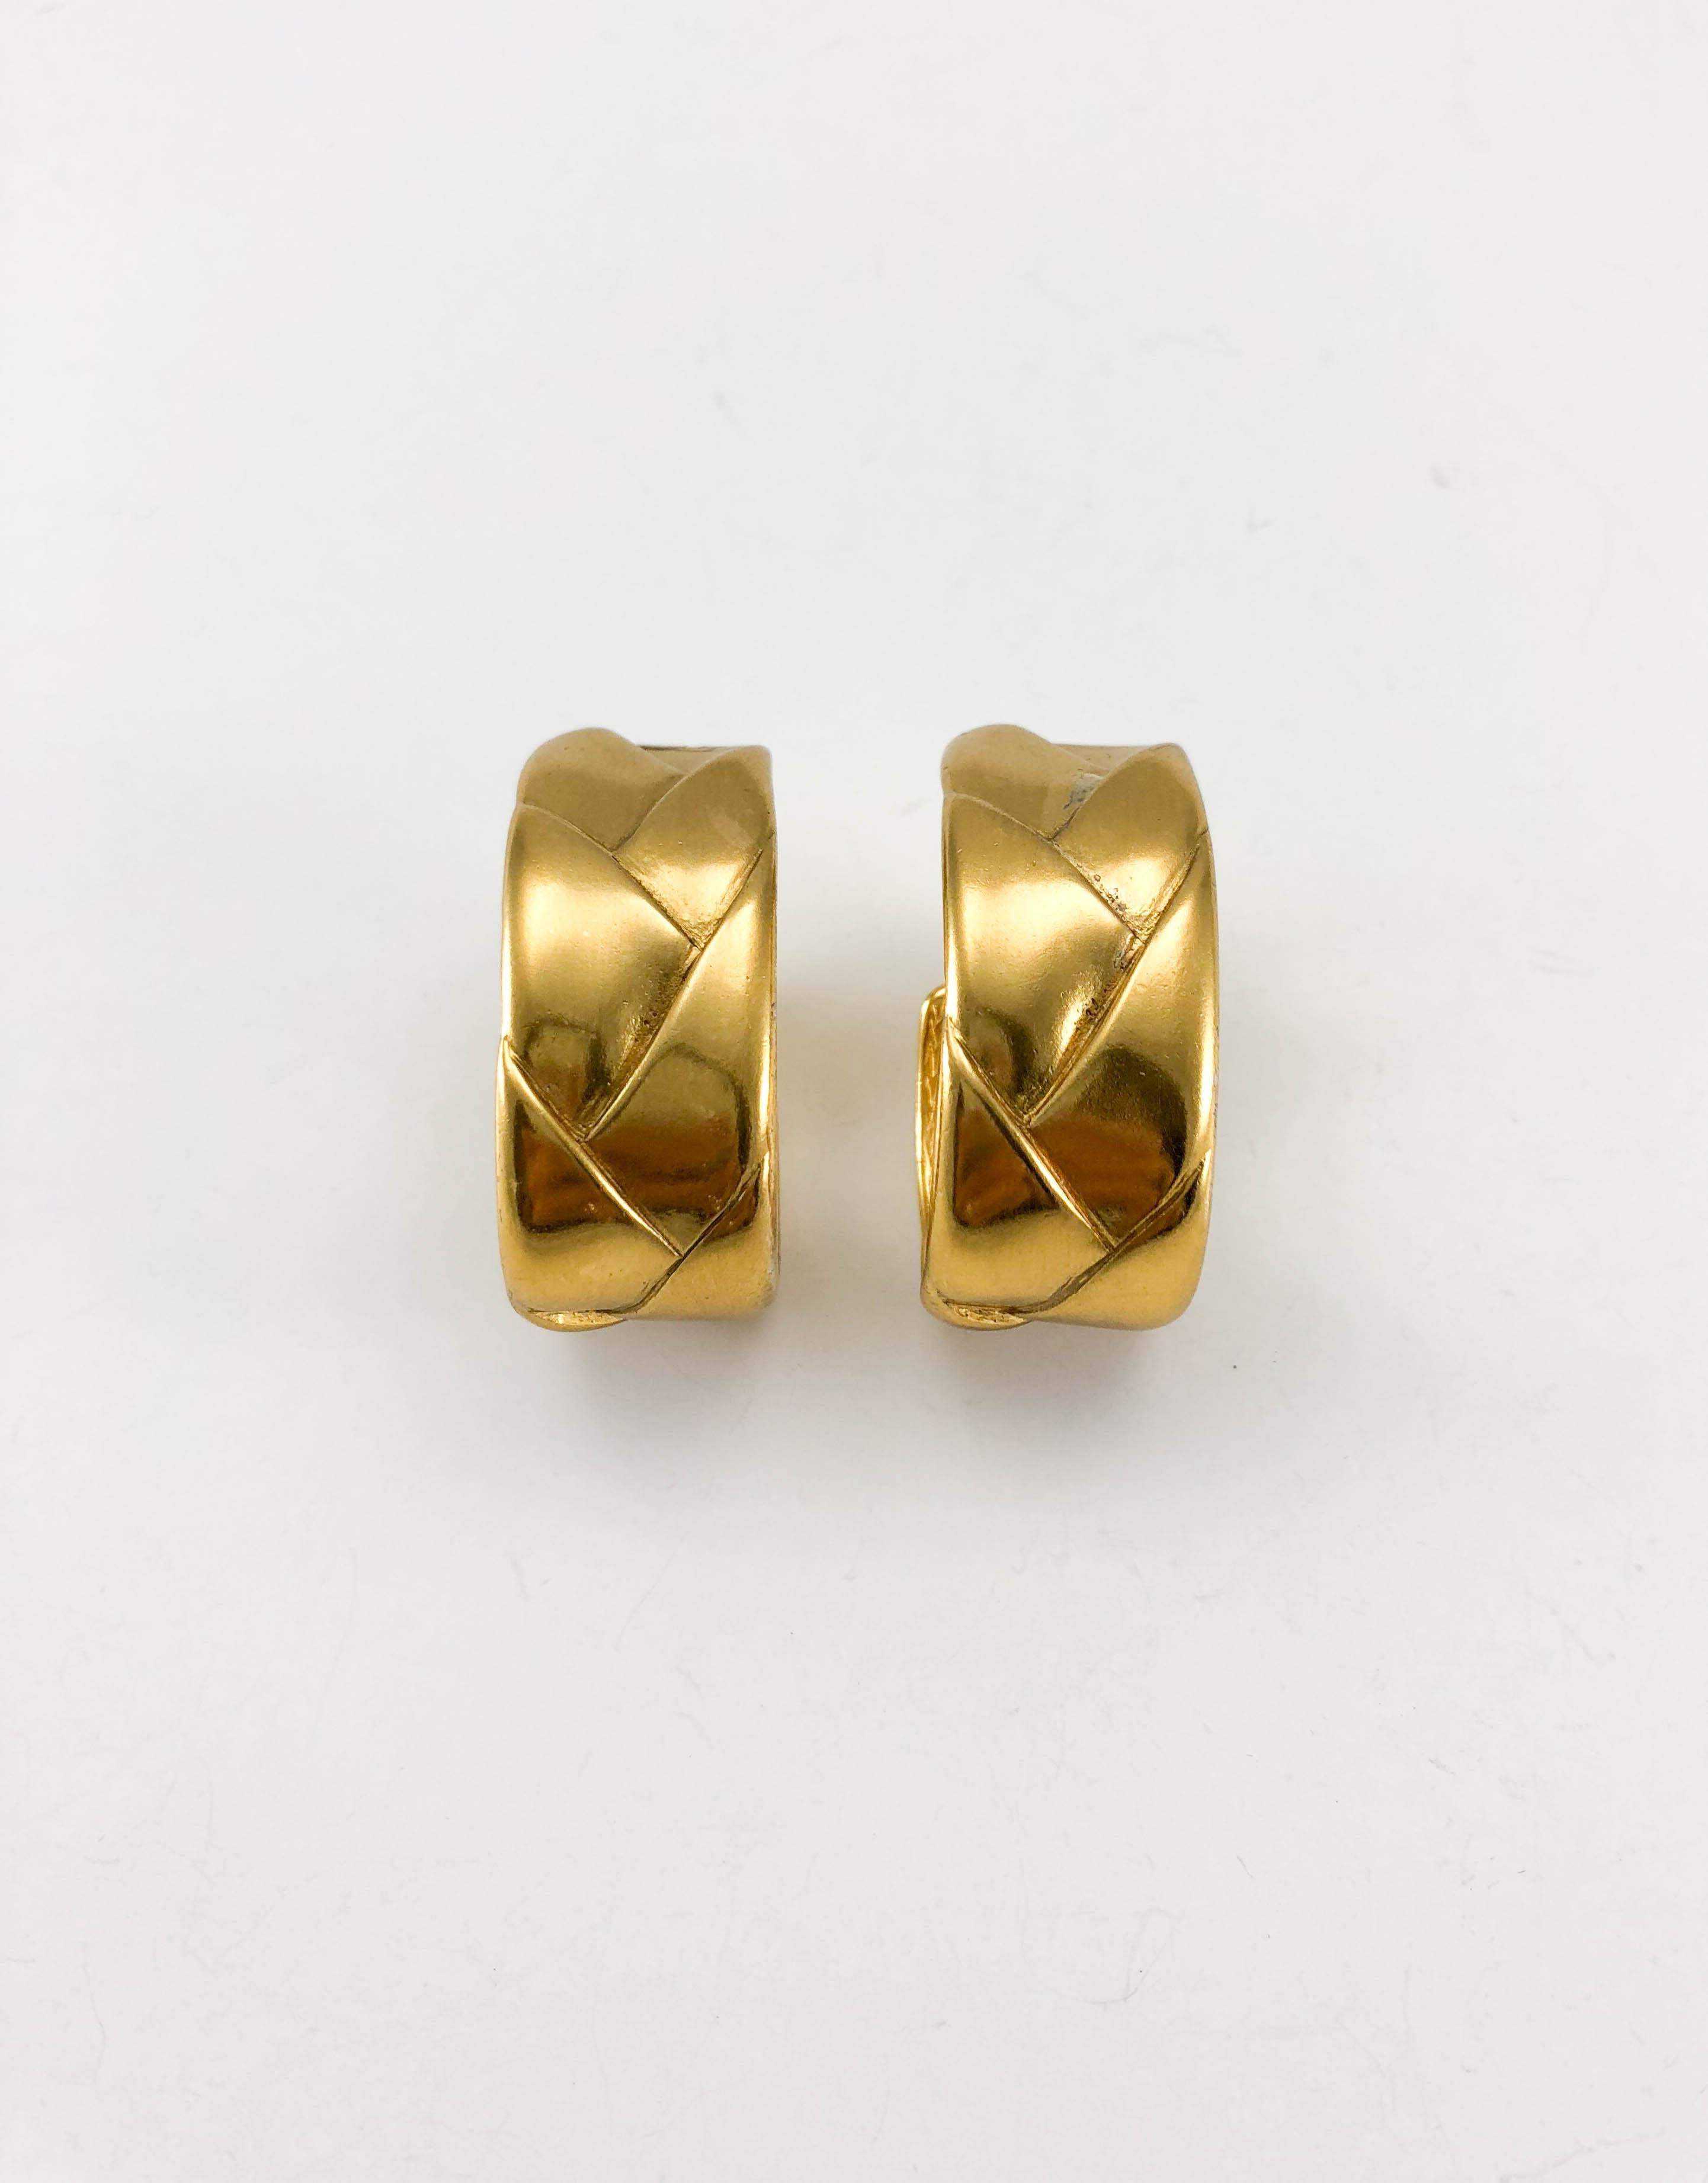 Vintage Yves Saint Laurent Gold-Plated Hoop Clip-On Earrings. These chic earrings by Yves Saint Laurent date back from the 1980’s. Made in gold-plated metal, these hoop clip-on earrings feature a quilted design. YSL signed on the back. A stylish